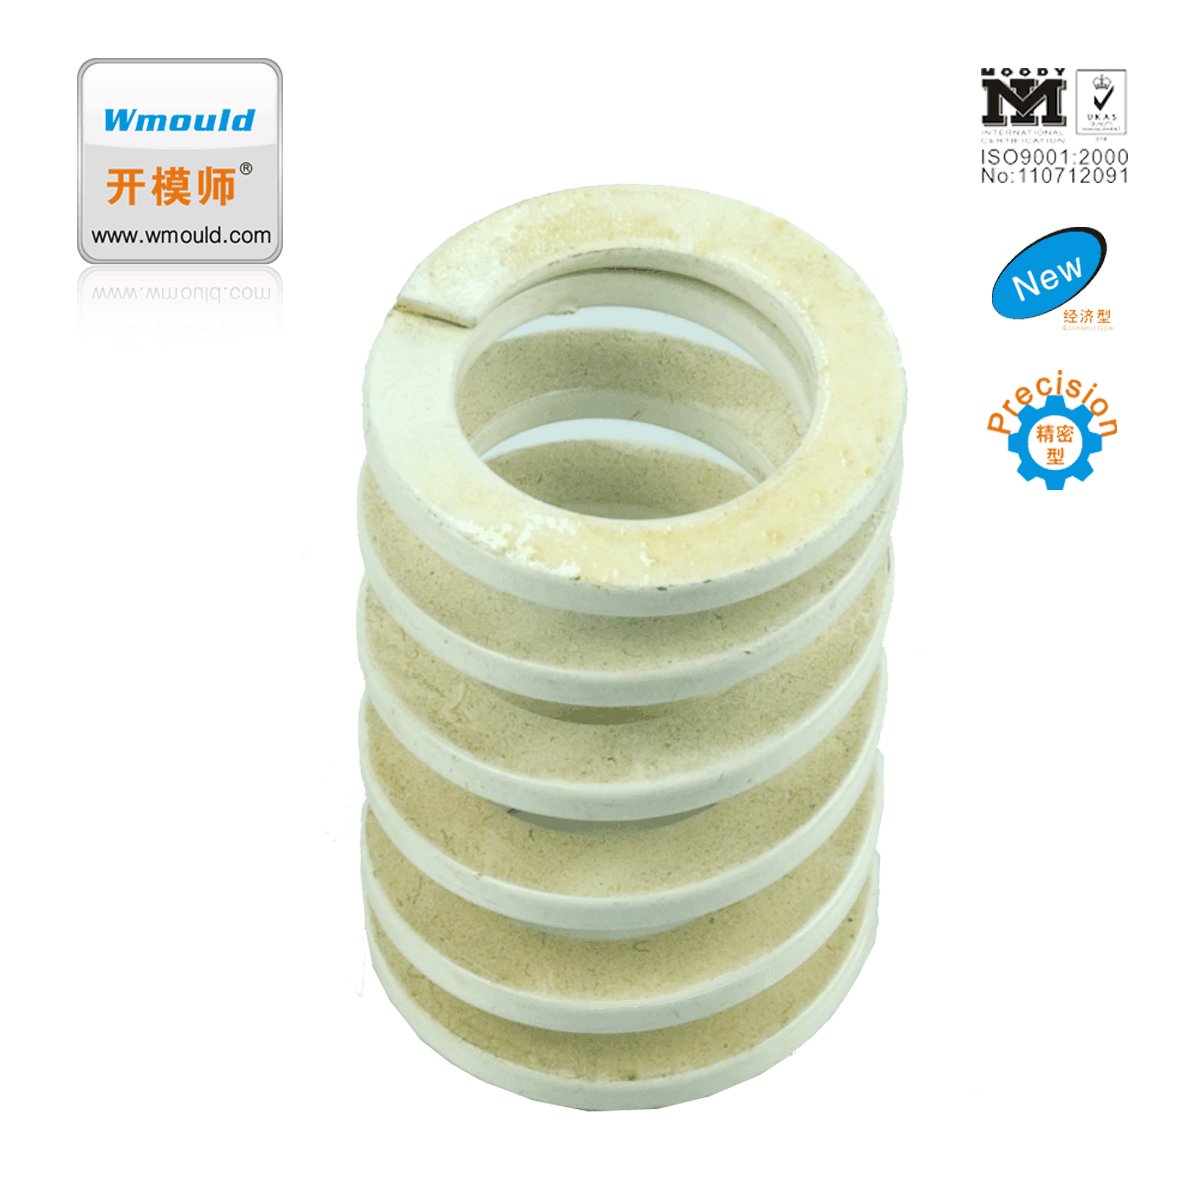 Mold standard parts coil spring 2